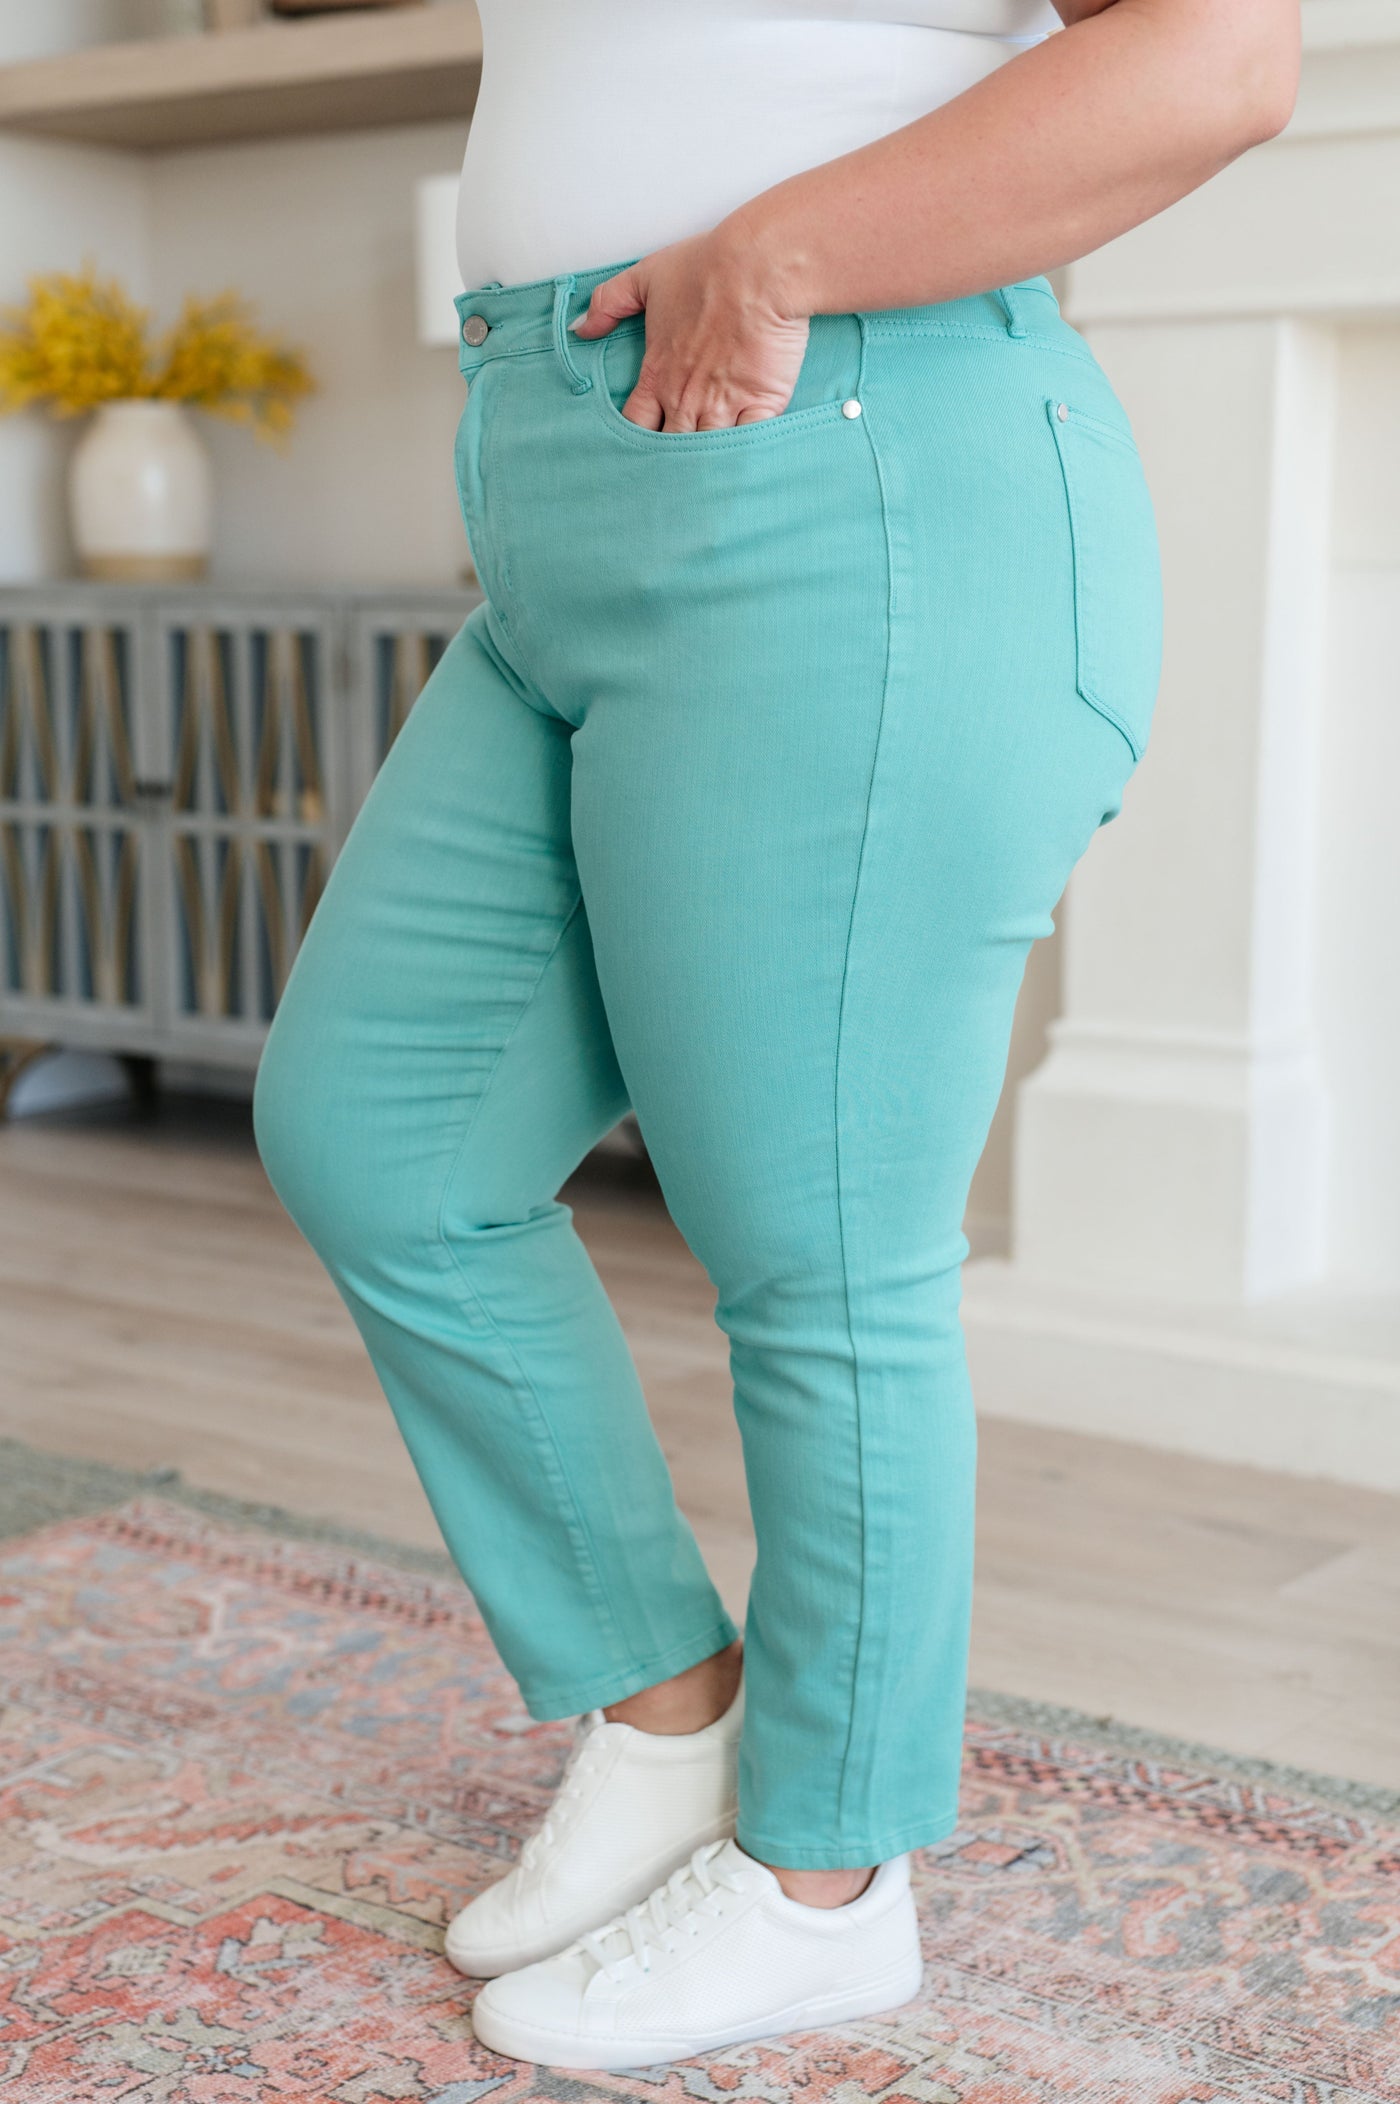 Judy Blue Bridgette High Rise Garment Dyed Slim Jeans in Aquamarine Southern Soul Collectives